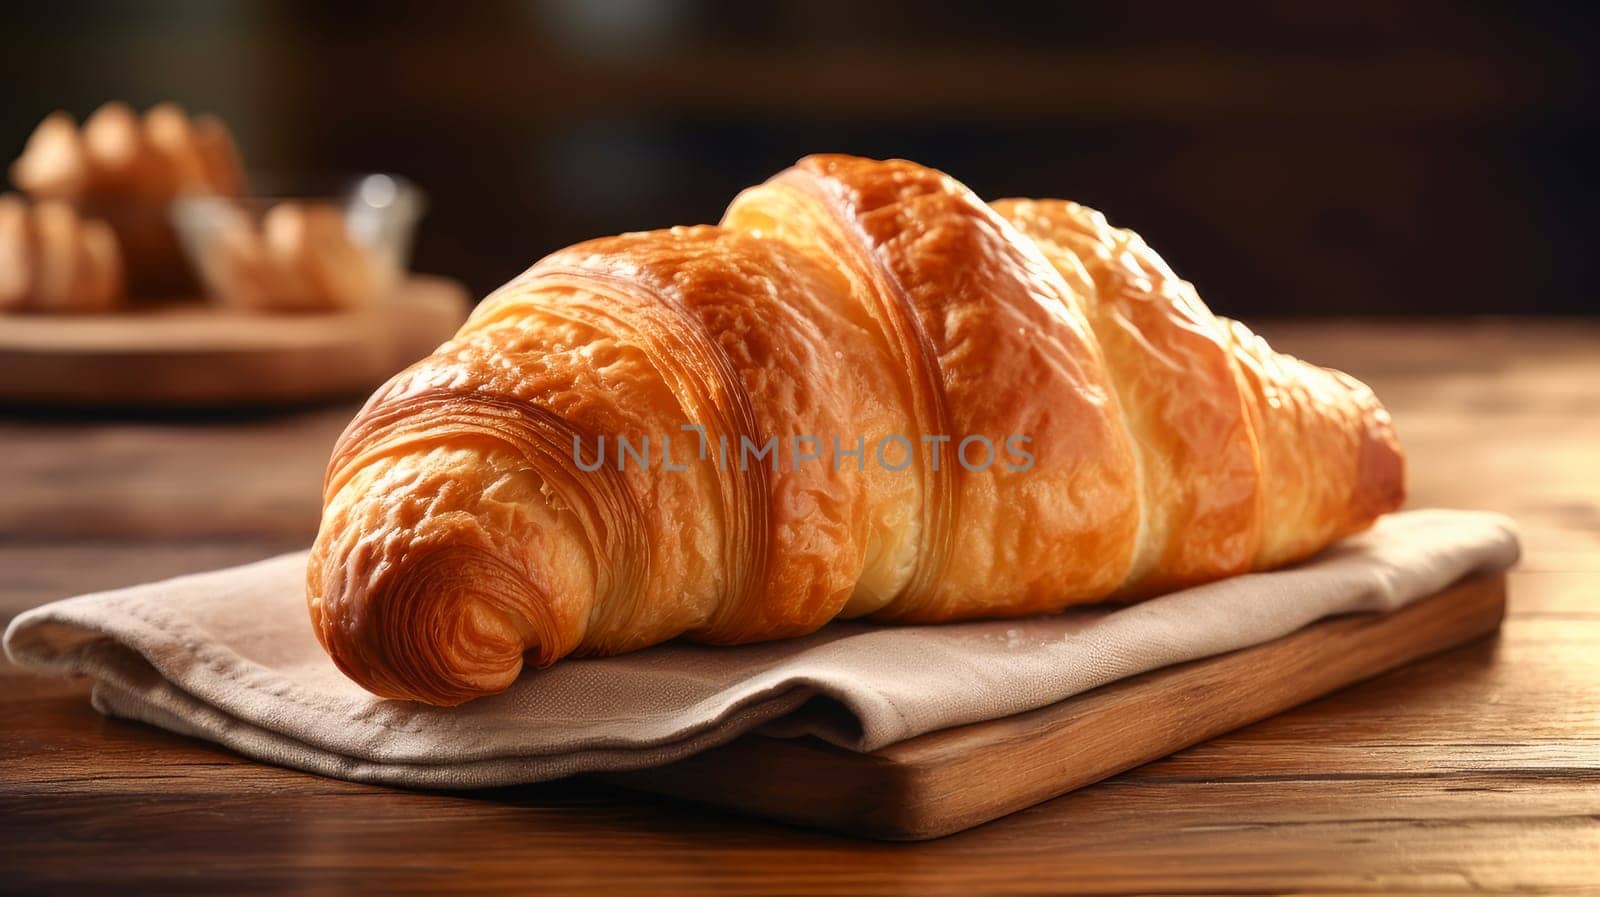 Breakfast fresh golden French croissant on the table, on a wooden surface near the window. Fresh classic pastries. Delicious food concept, private bakery, small business, self-employed, small business in the city, cozy place for communication